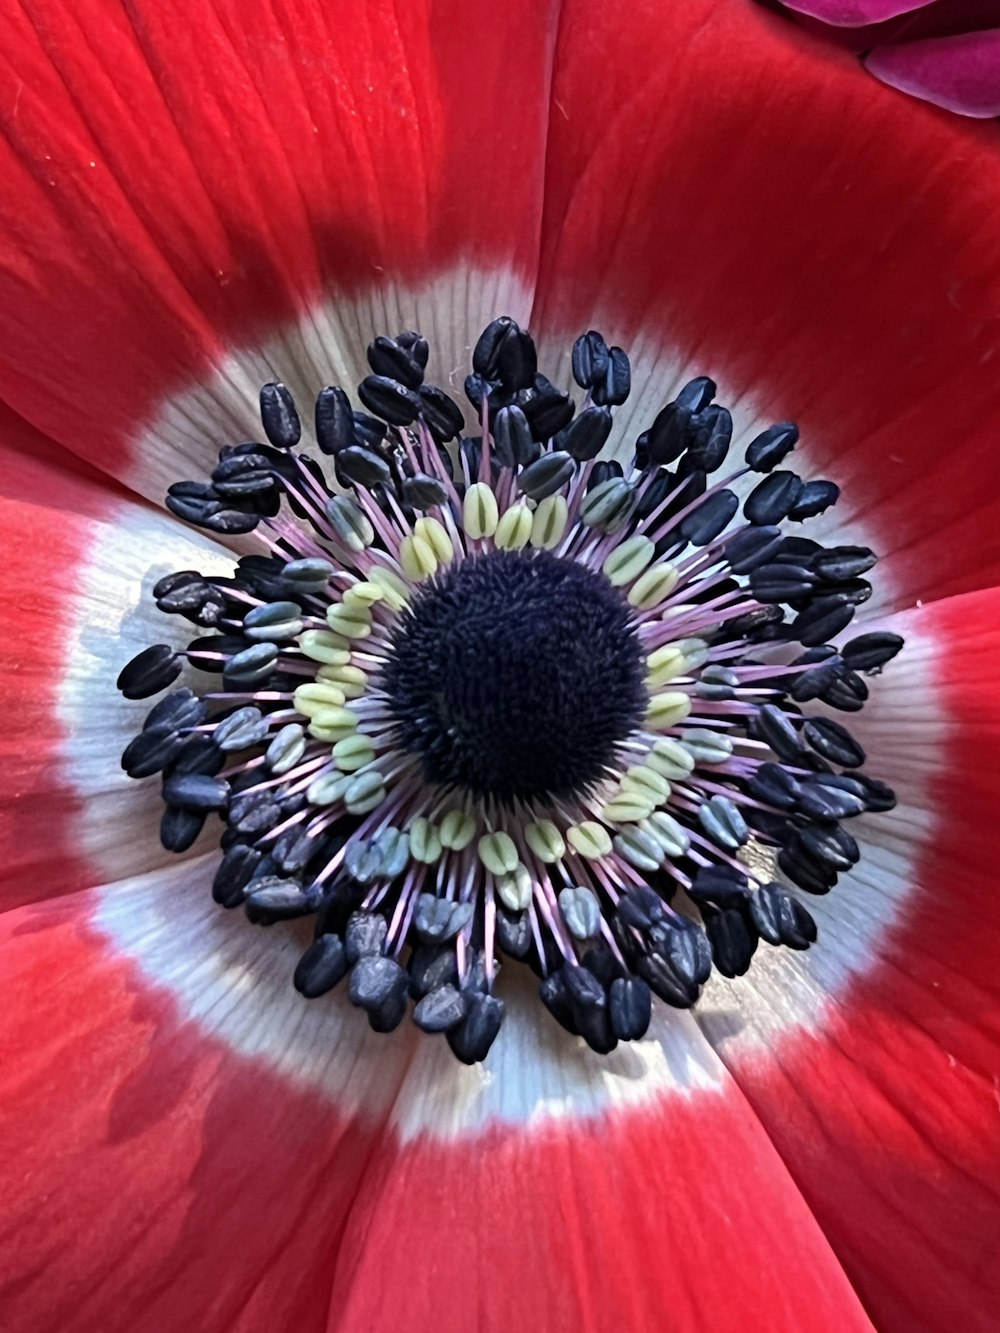 a close up of a red flower with a black center